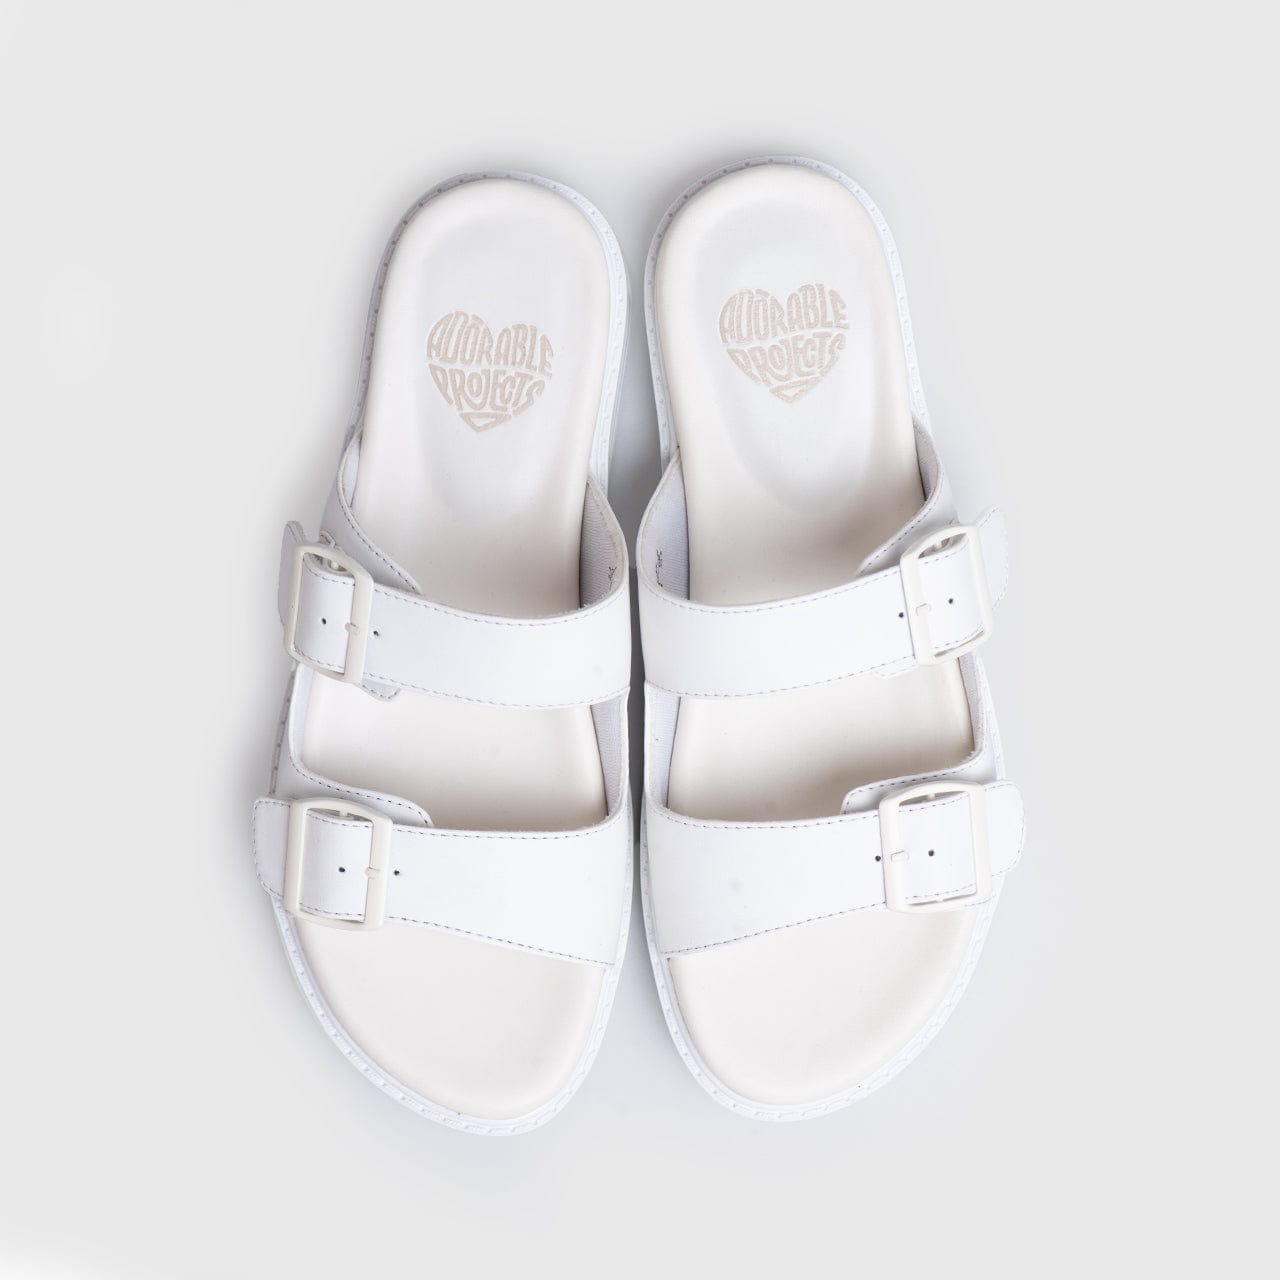 Adorable Projects Official Adorableprojects - Claritaya Sandals White - Sendal Wanita